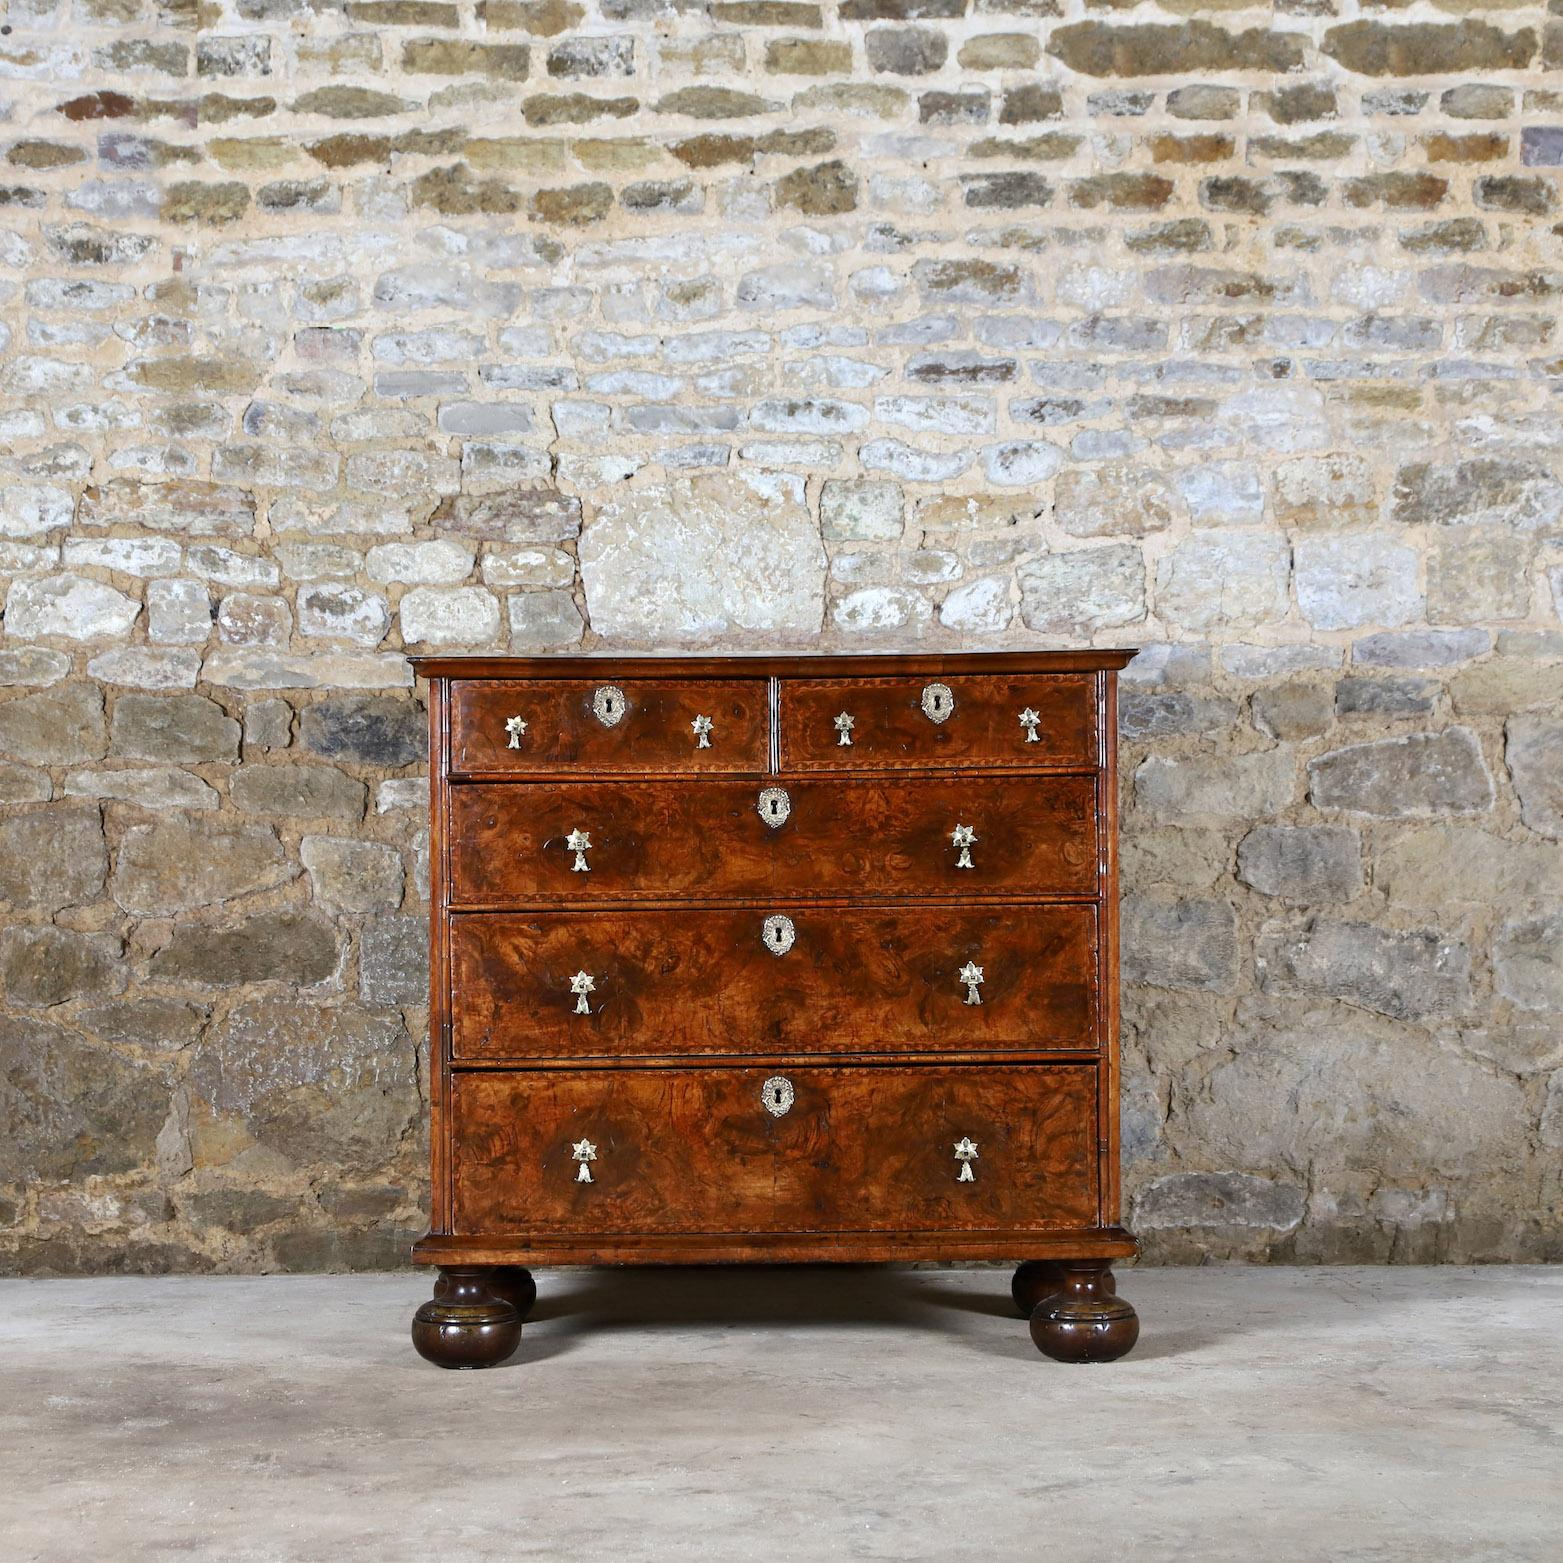 Vagabond Antiques presents an 18th Century walnut chest of drawers

England, Circa 1700 & later

”A classic William & Mary design, warm colour to the walnut veneer, inlaid with seaweed marquetry, raised on bun feet ”

